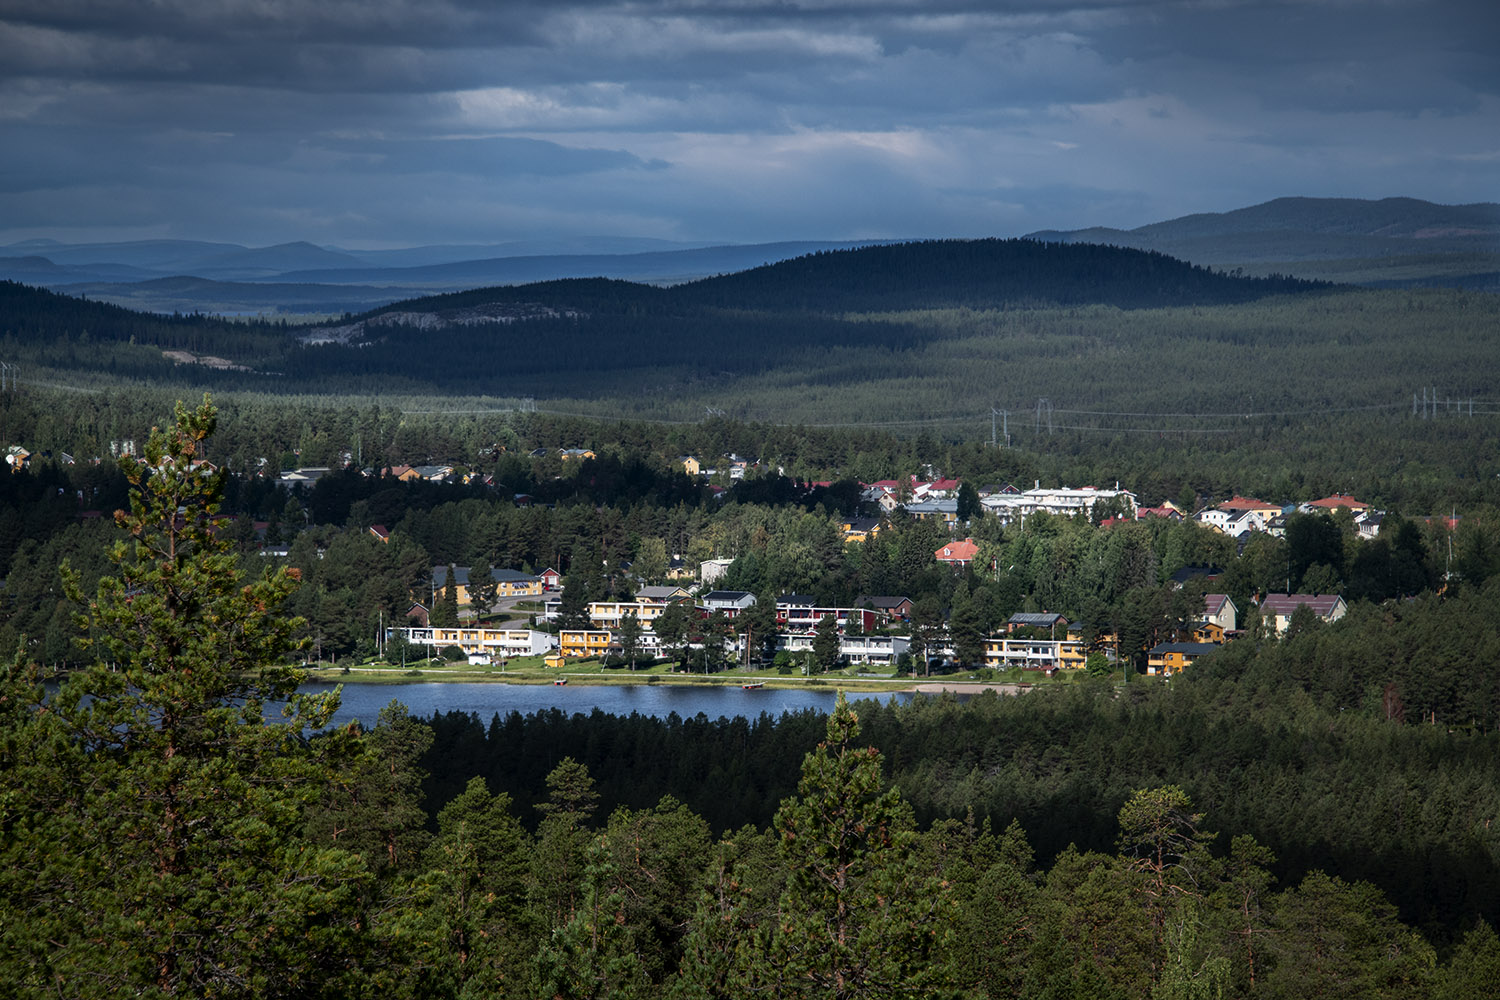 View over the Jokkmokk landscape with loots of pine trees, a lake, and a group of building.